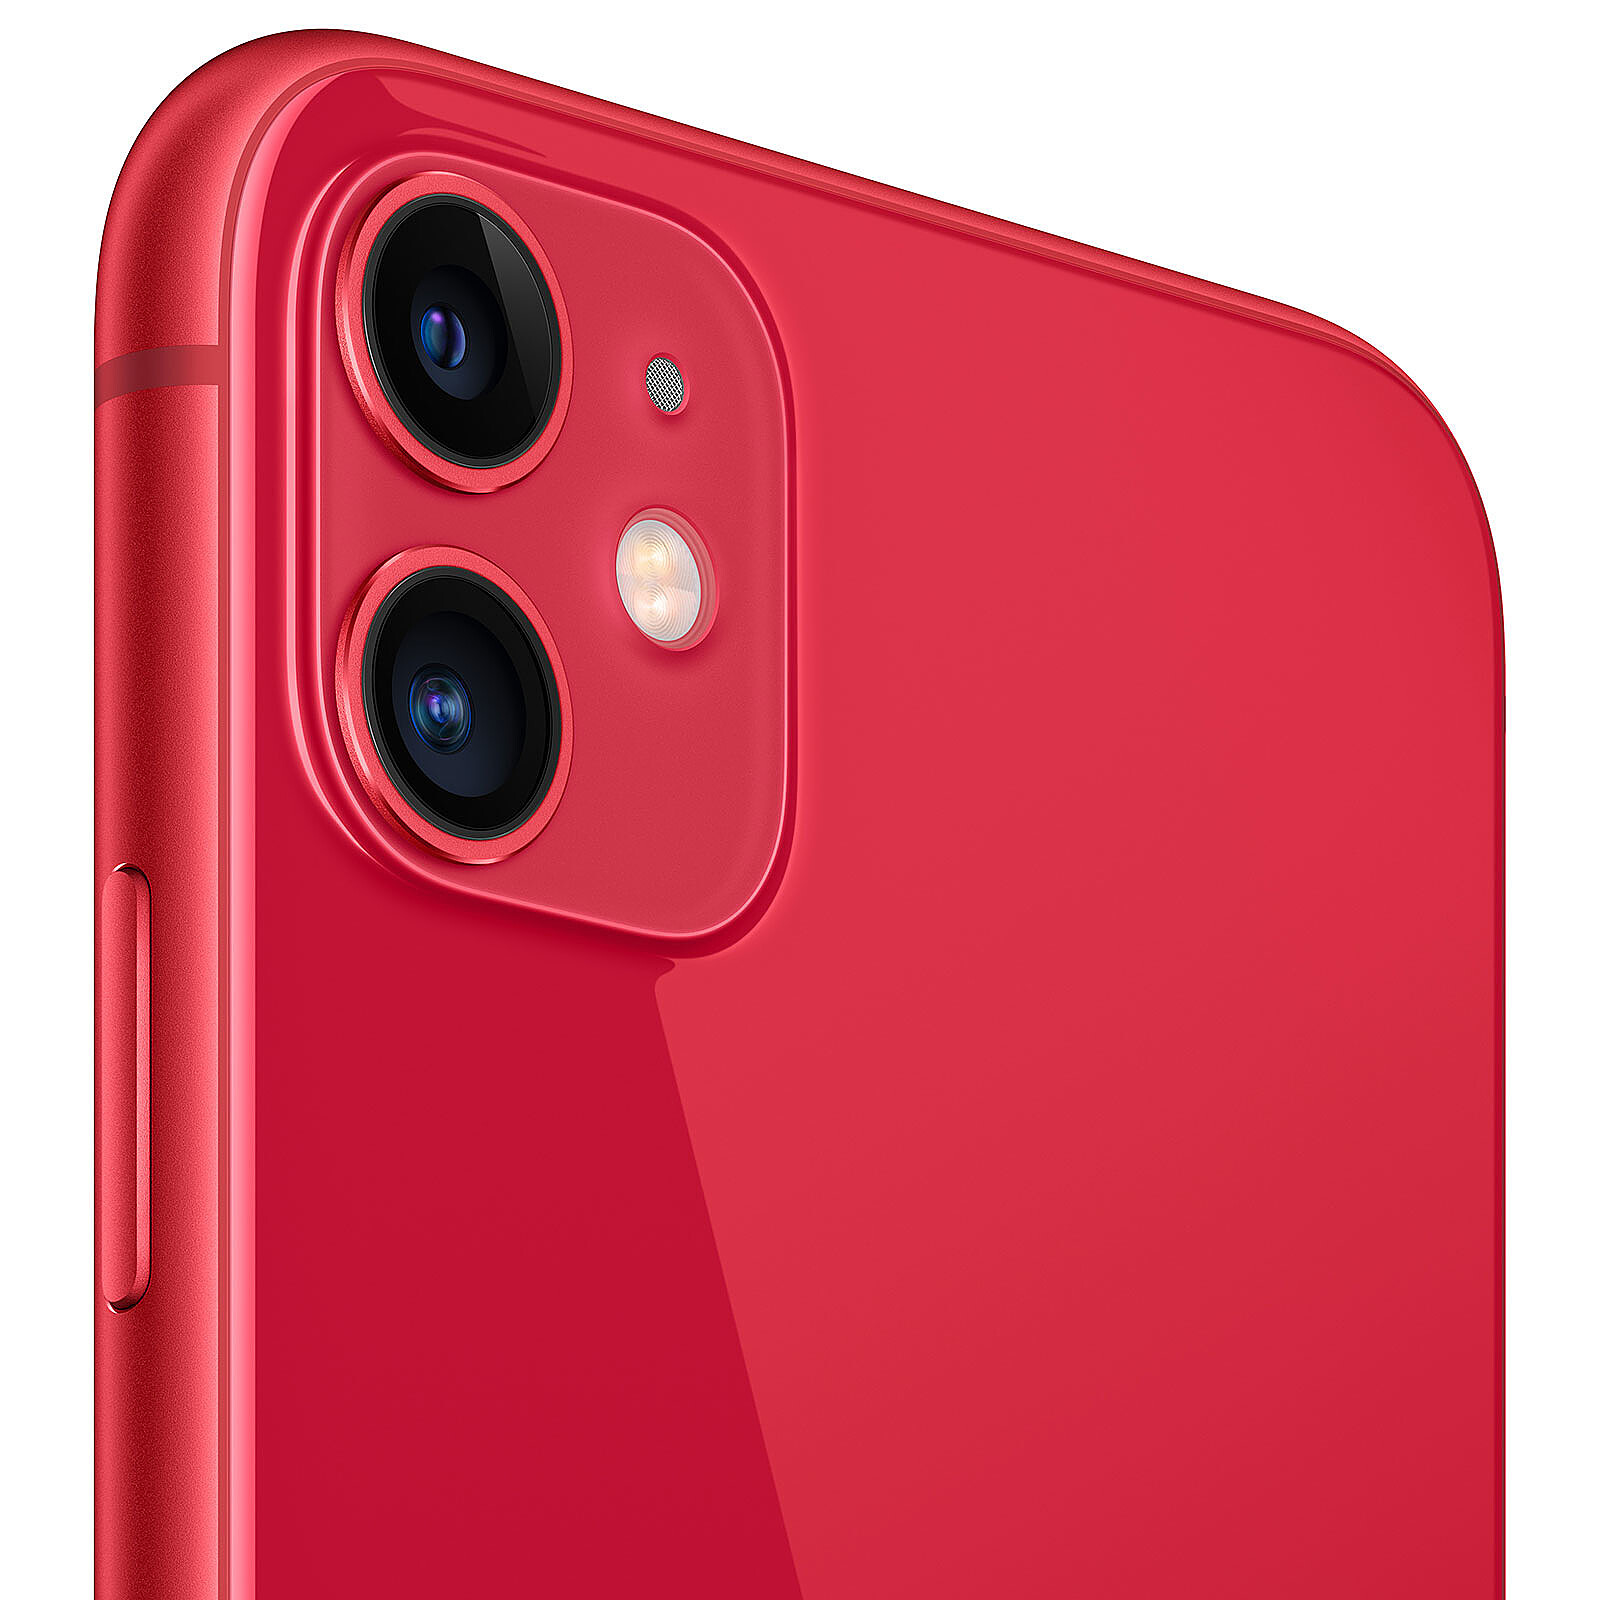 Apple iPhone 11 256GB (PRODUCTO)RED - Móvil y smartphone - LDLC